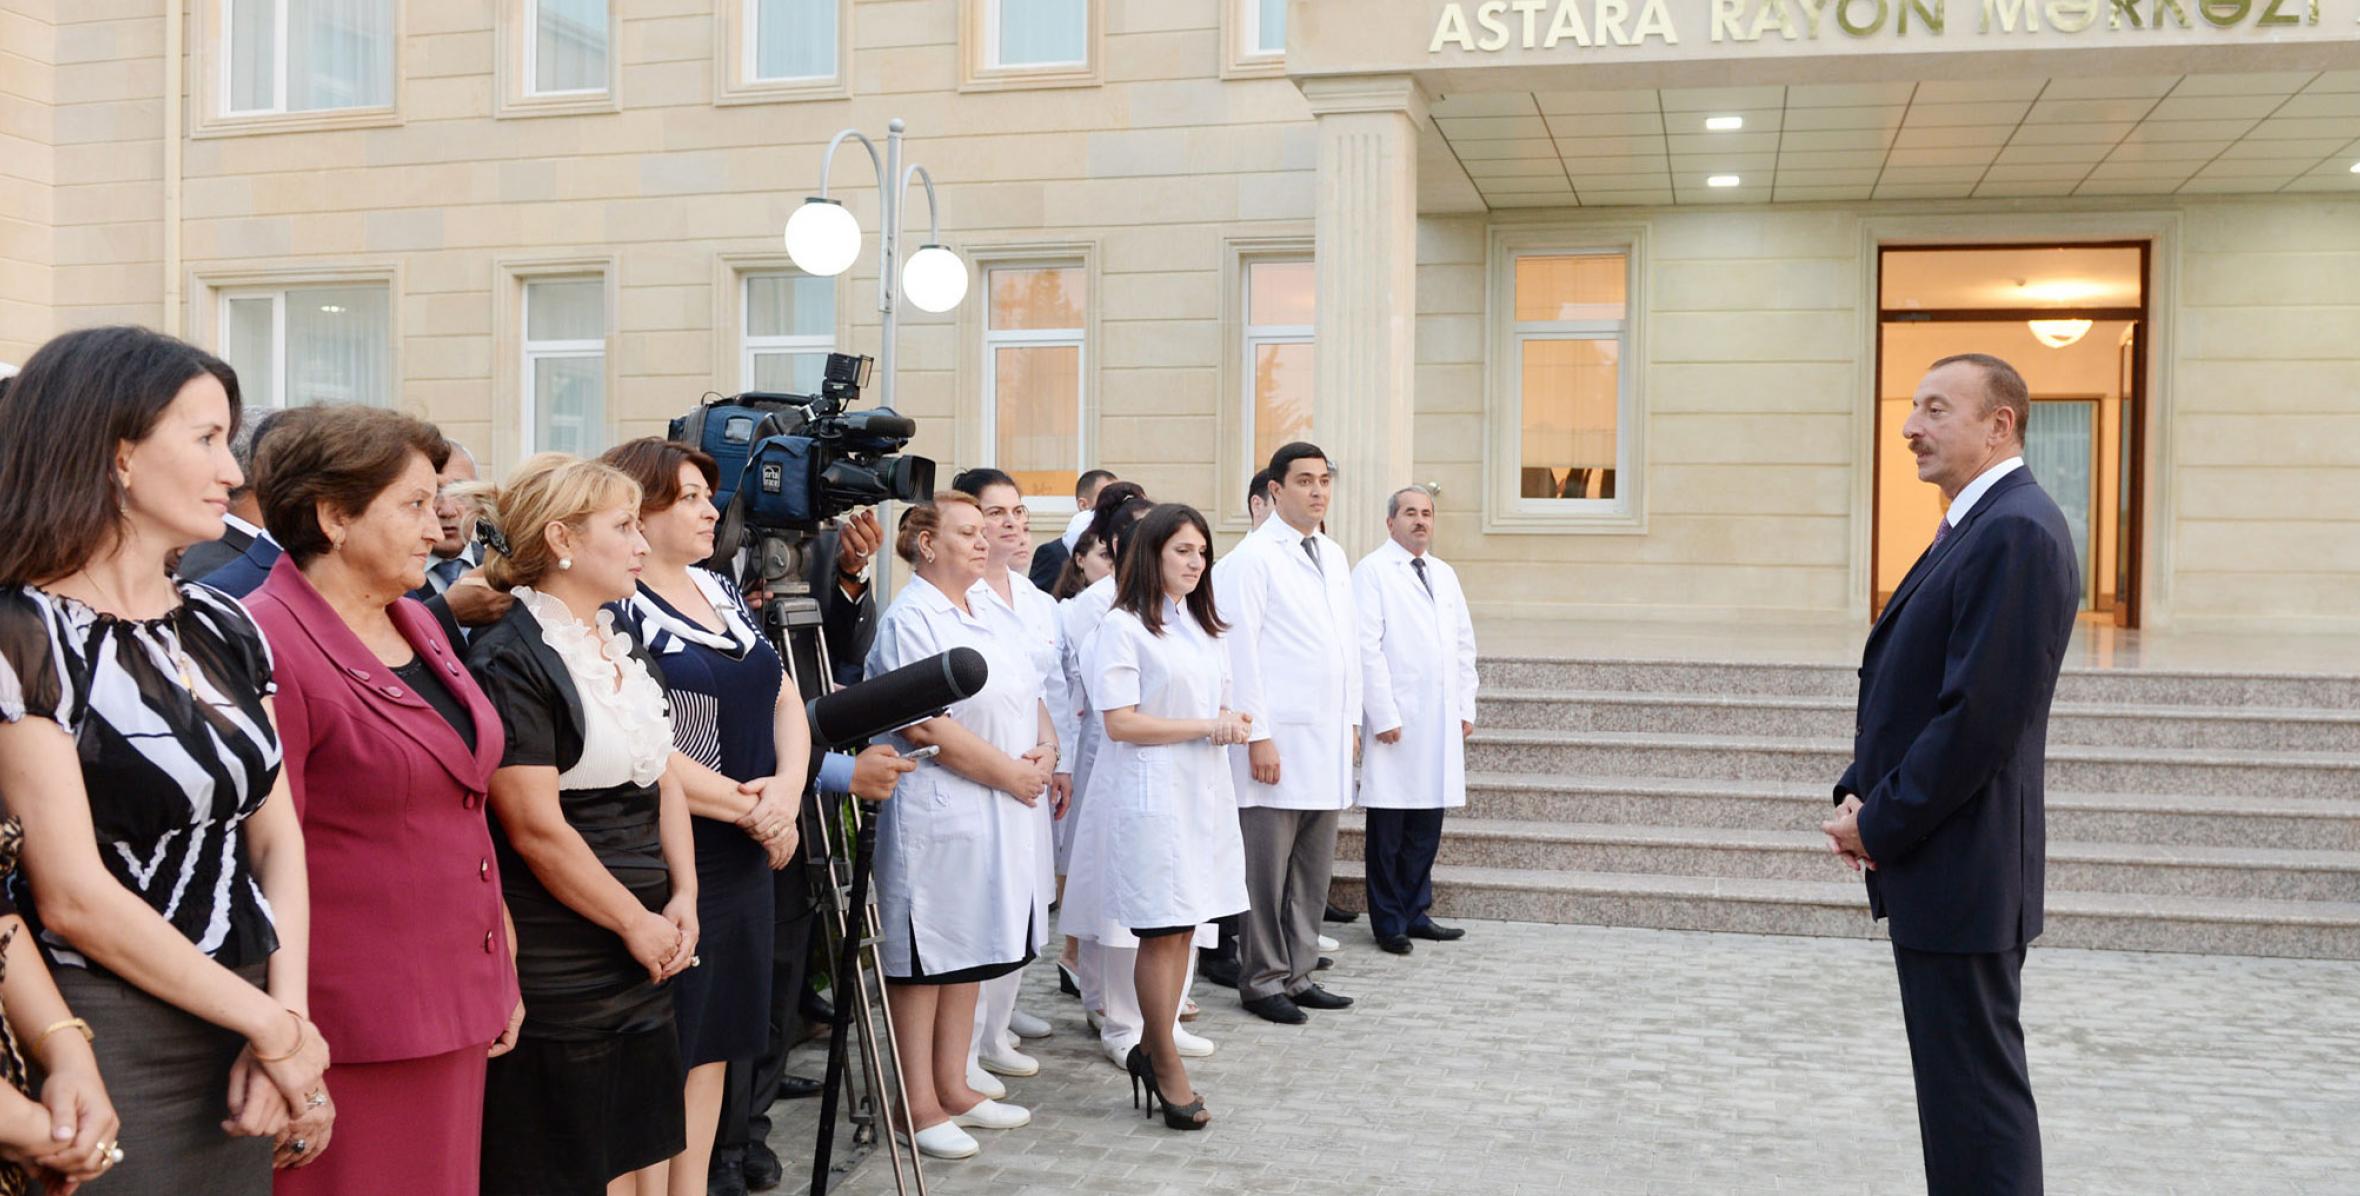 Ilham Aliyev reviewed the Astara District Central Hospital after major overhaul